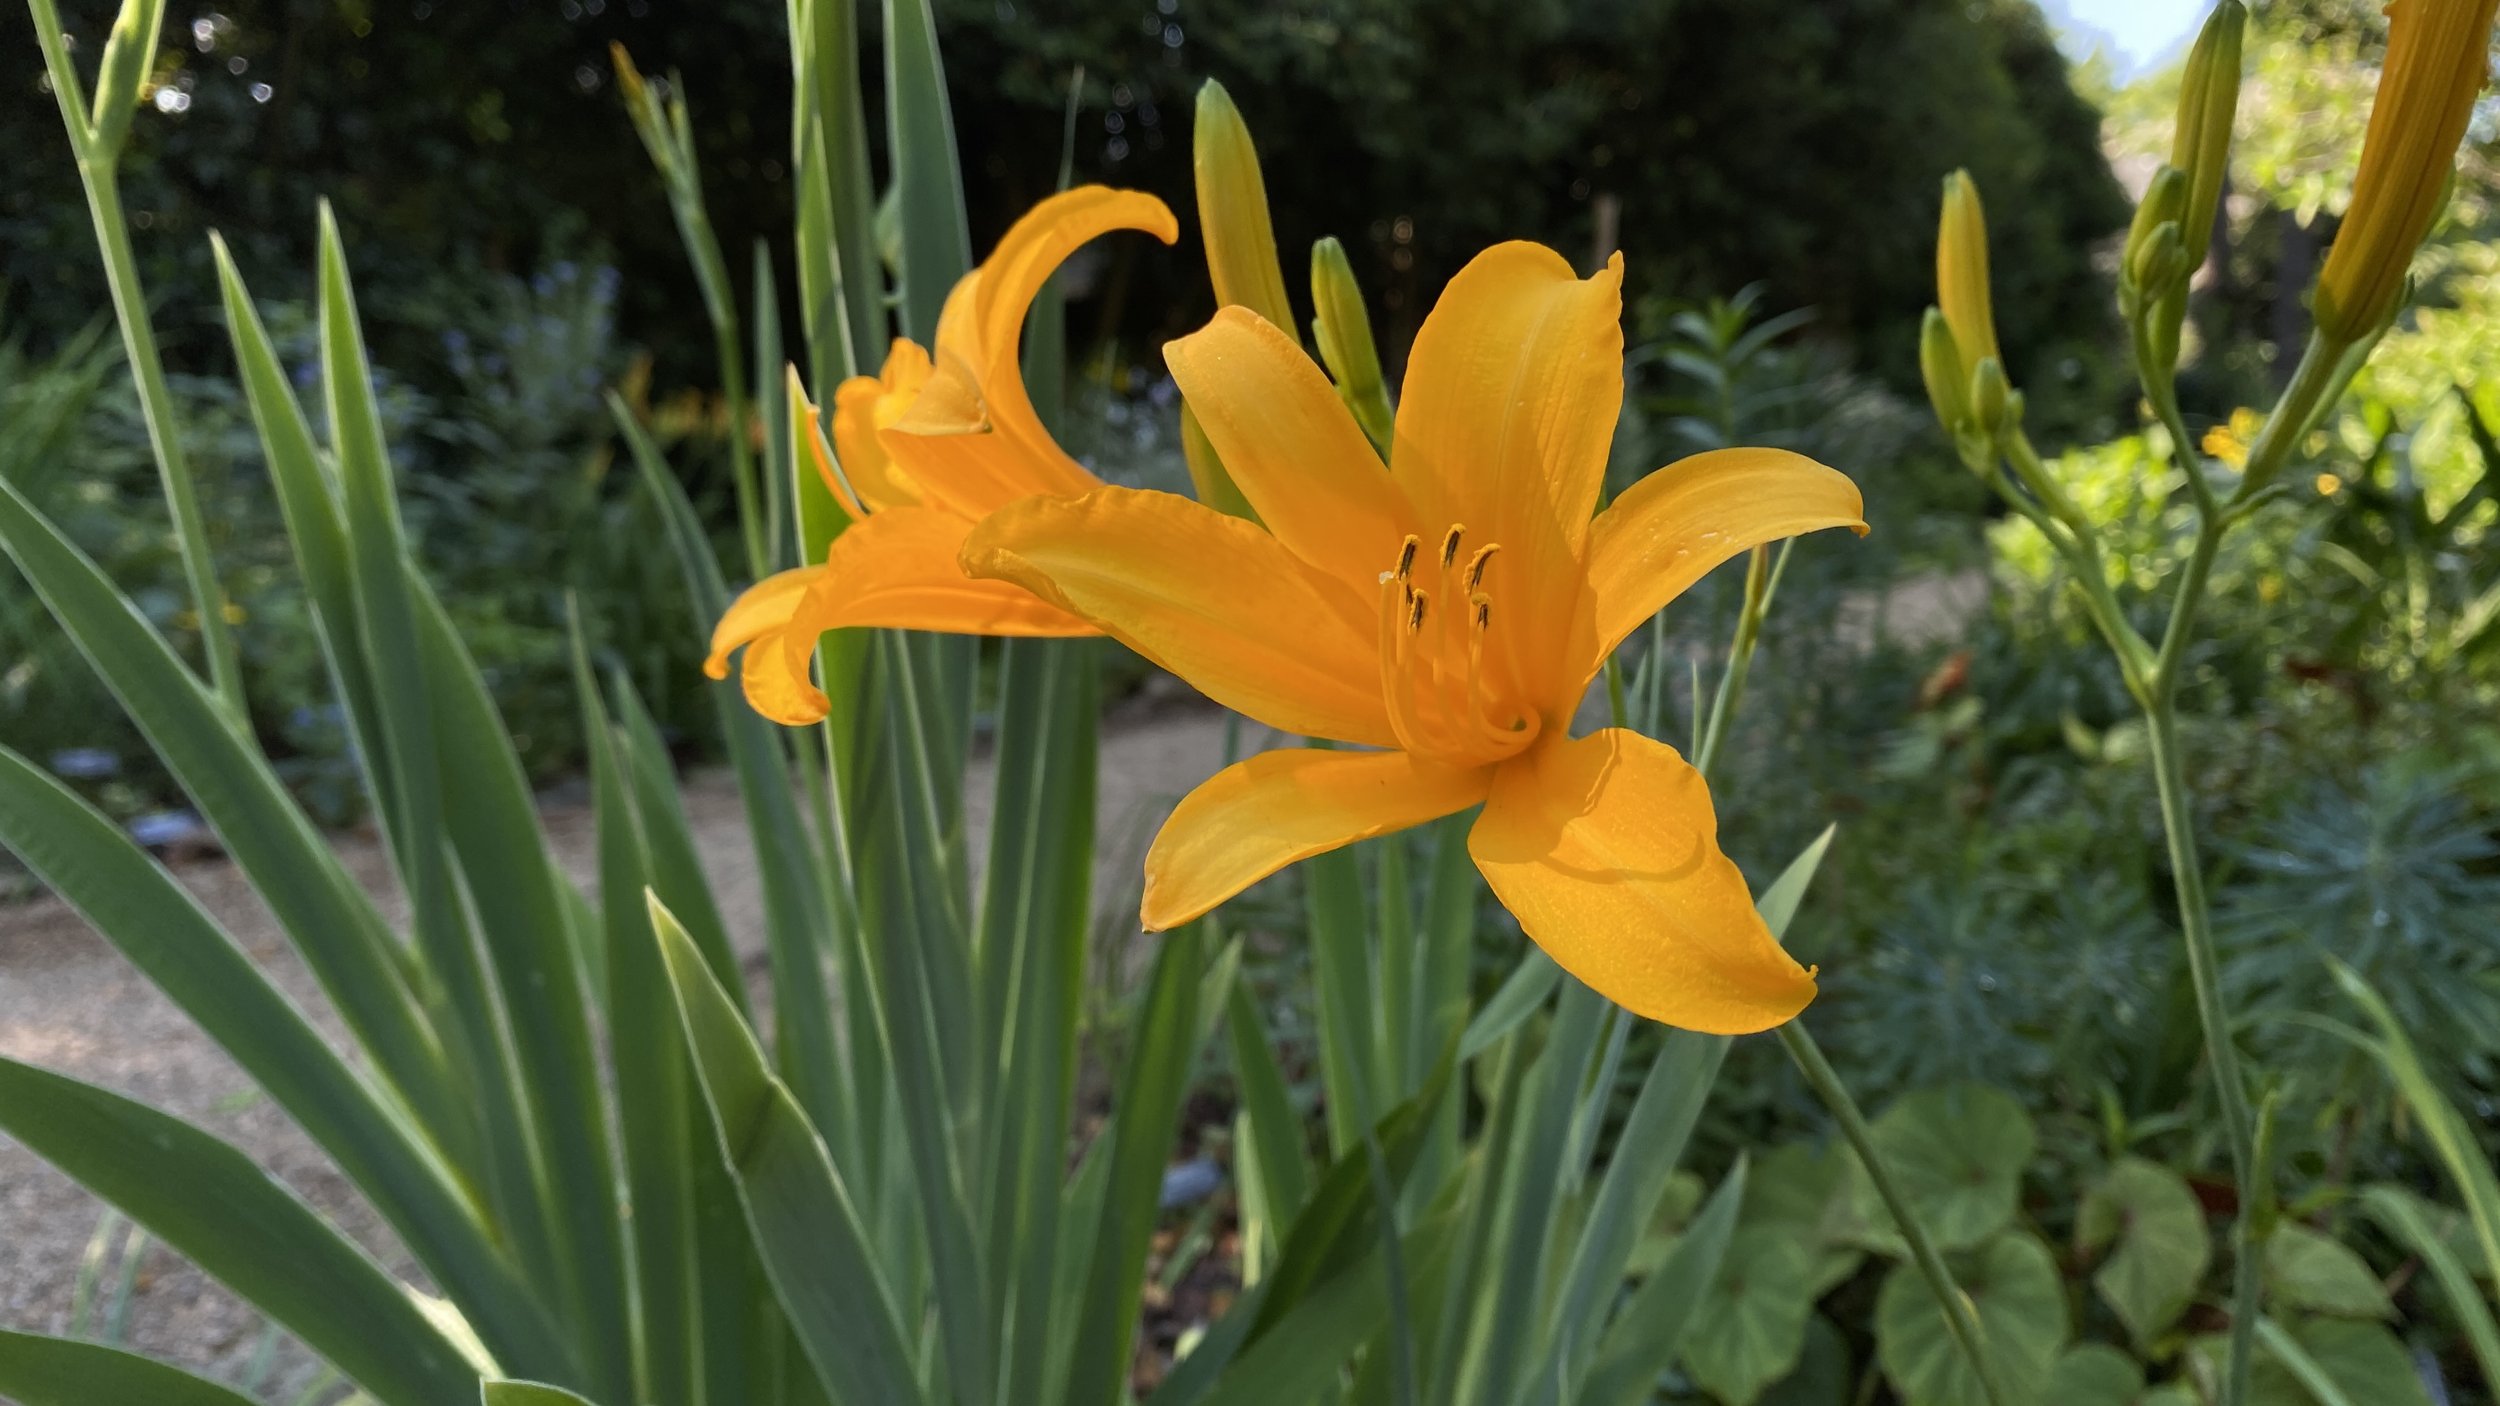 ...and more daylilies!